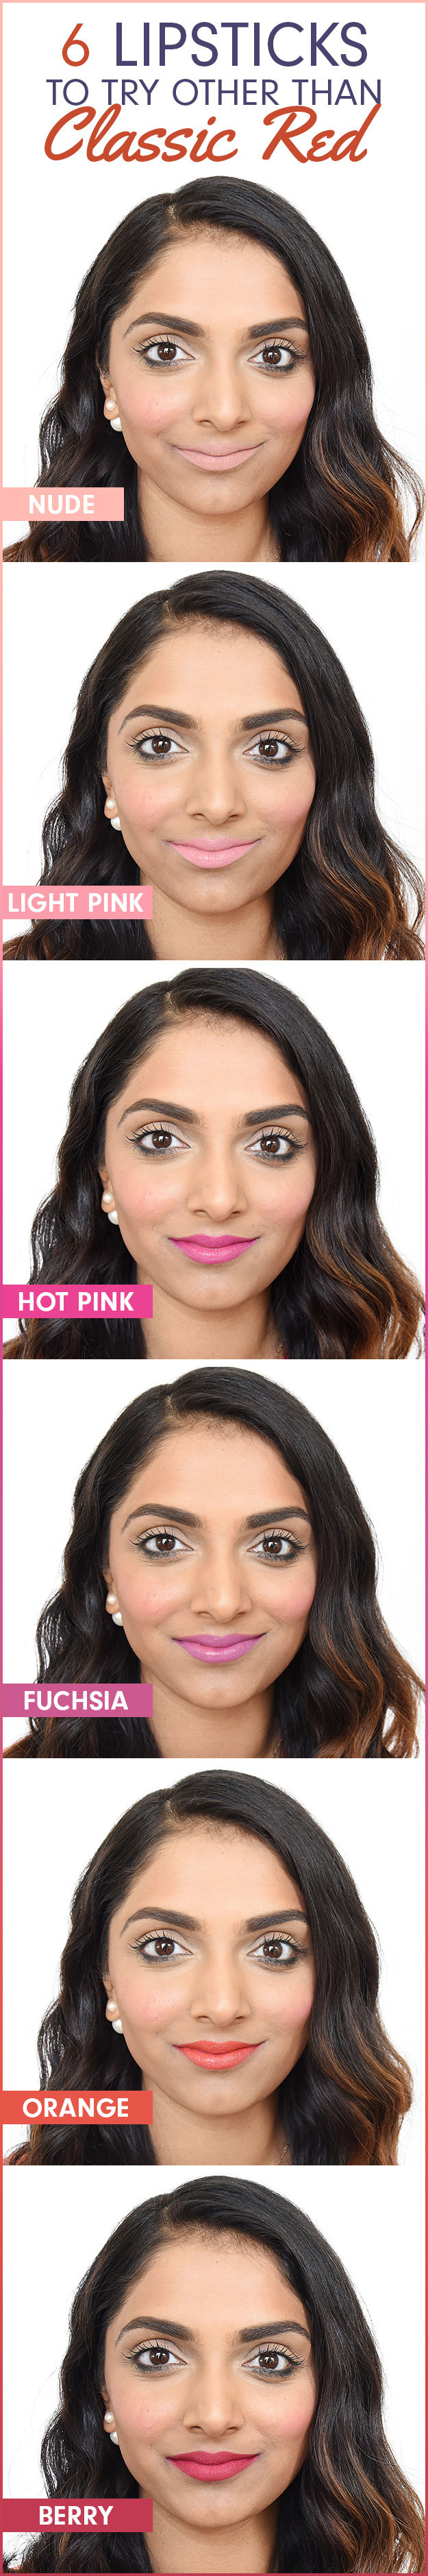 9 Ingenious Makeup Tips That Are Especially Useful For -3154